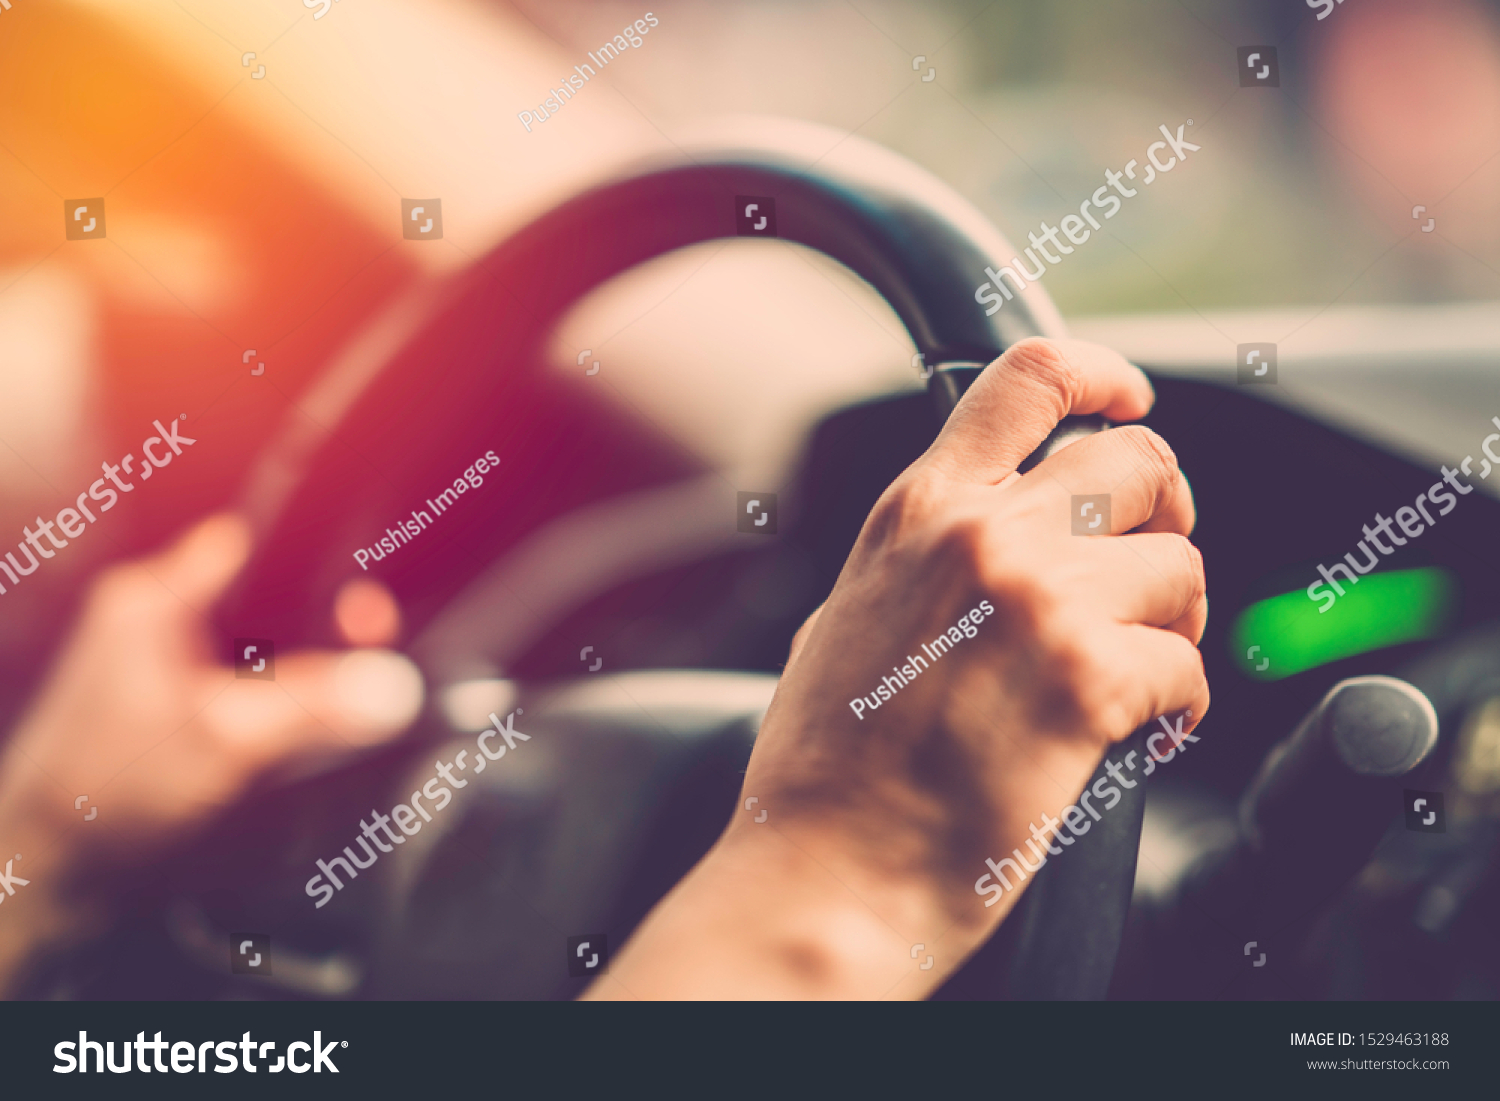 Woman hand driving car. Vintage filter #1529463188